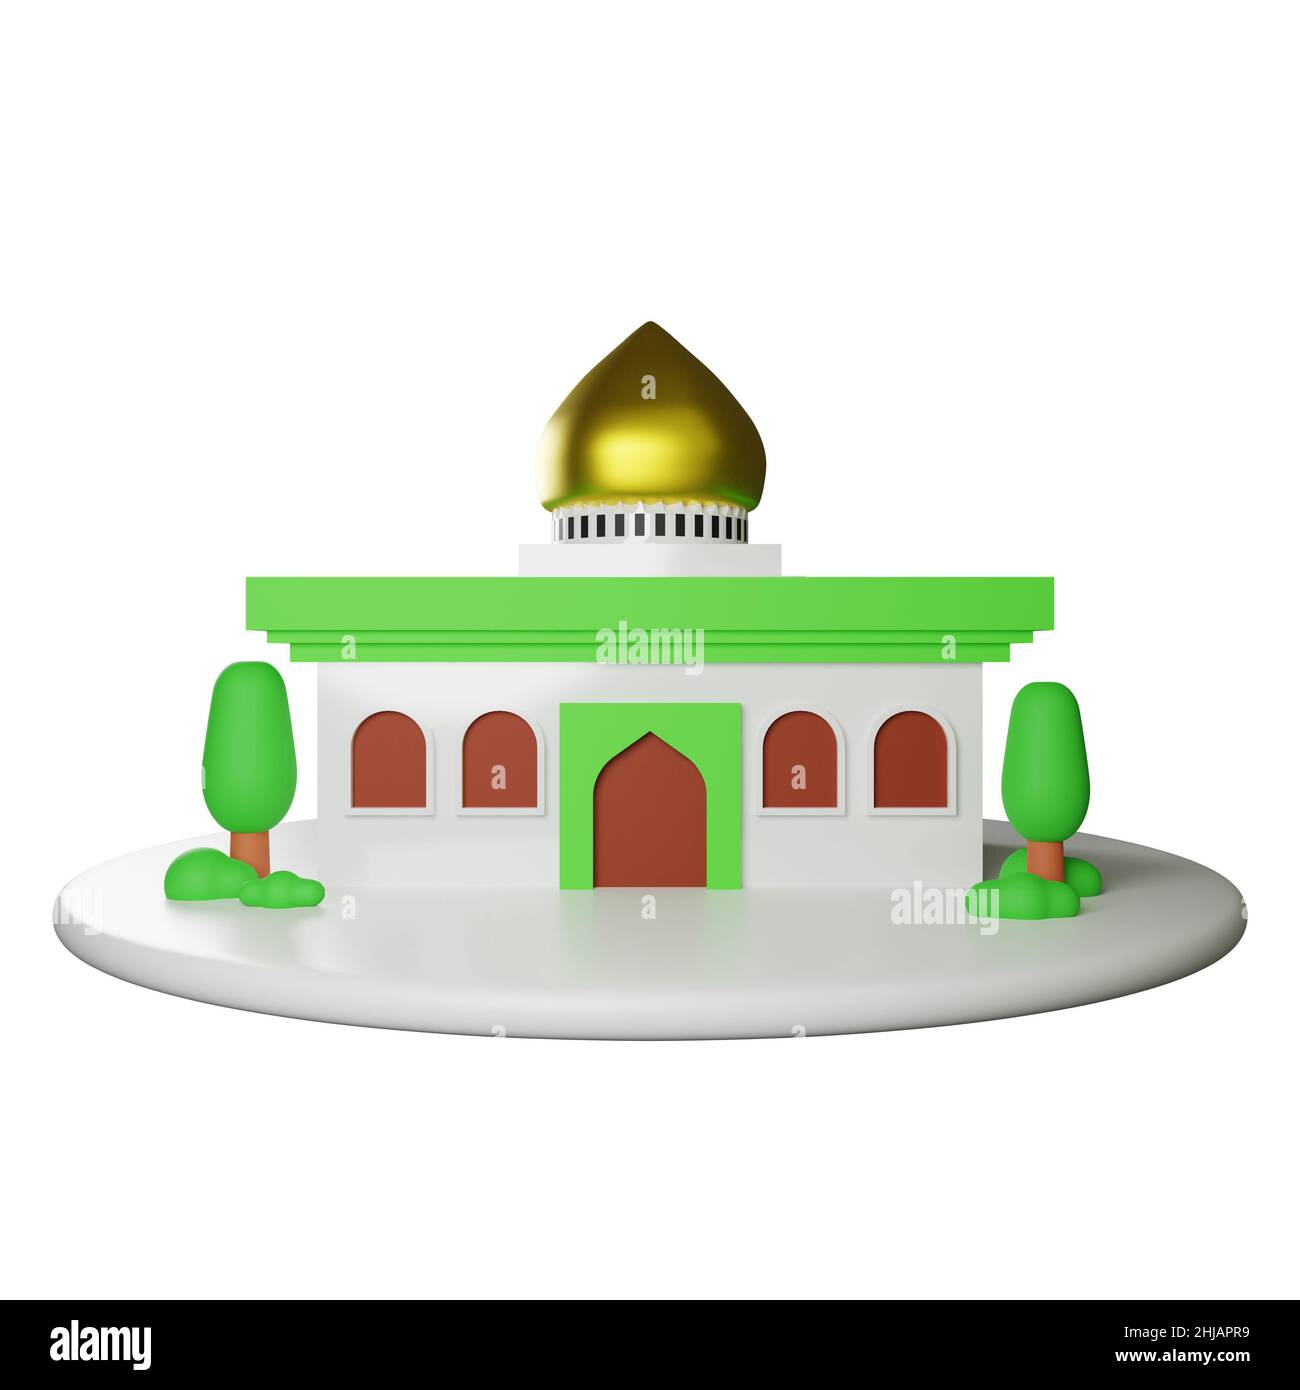 3d illustration of Islamic architectural mosque building Stock Photo